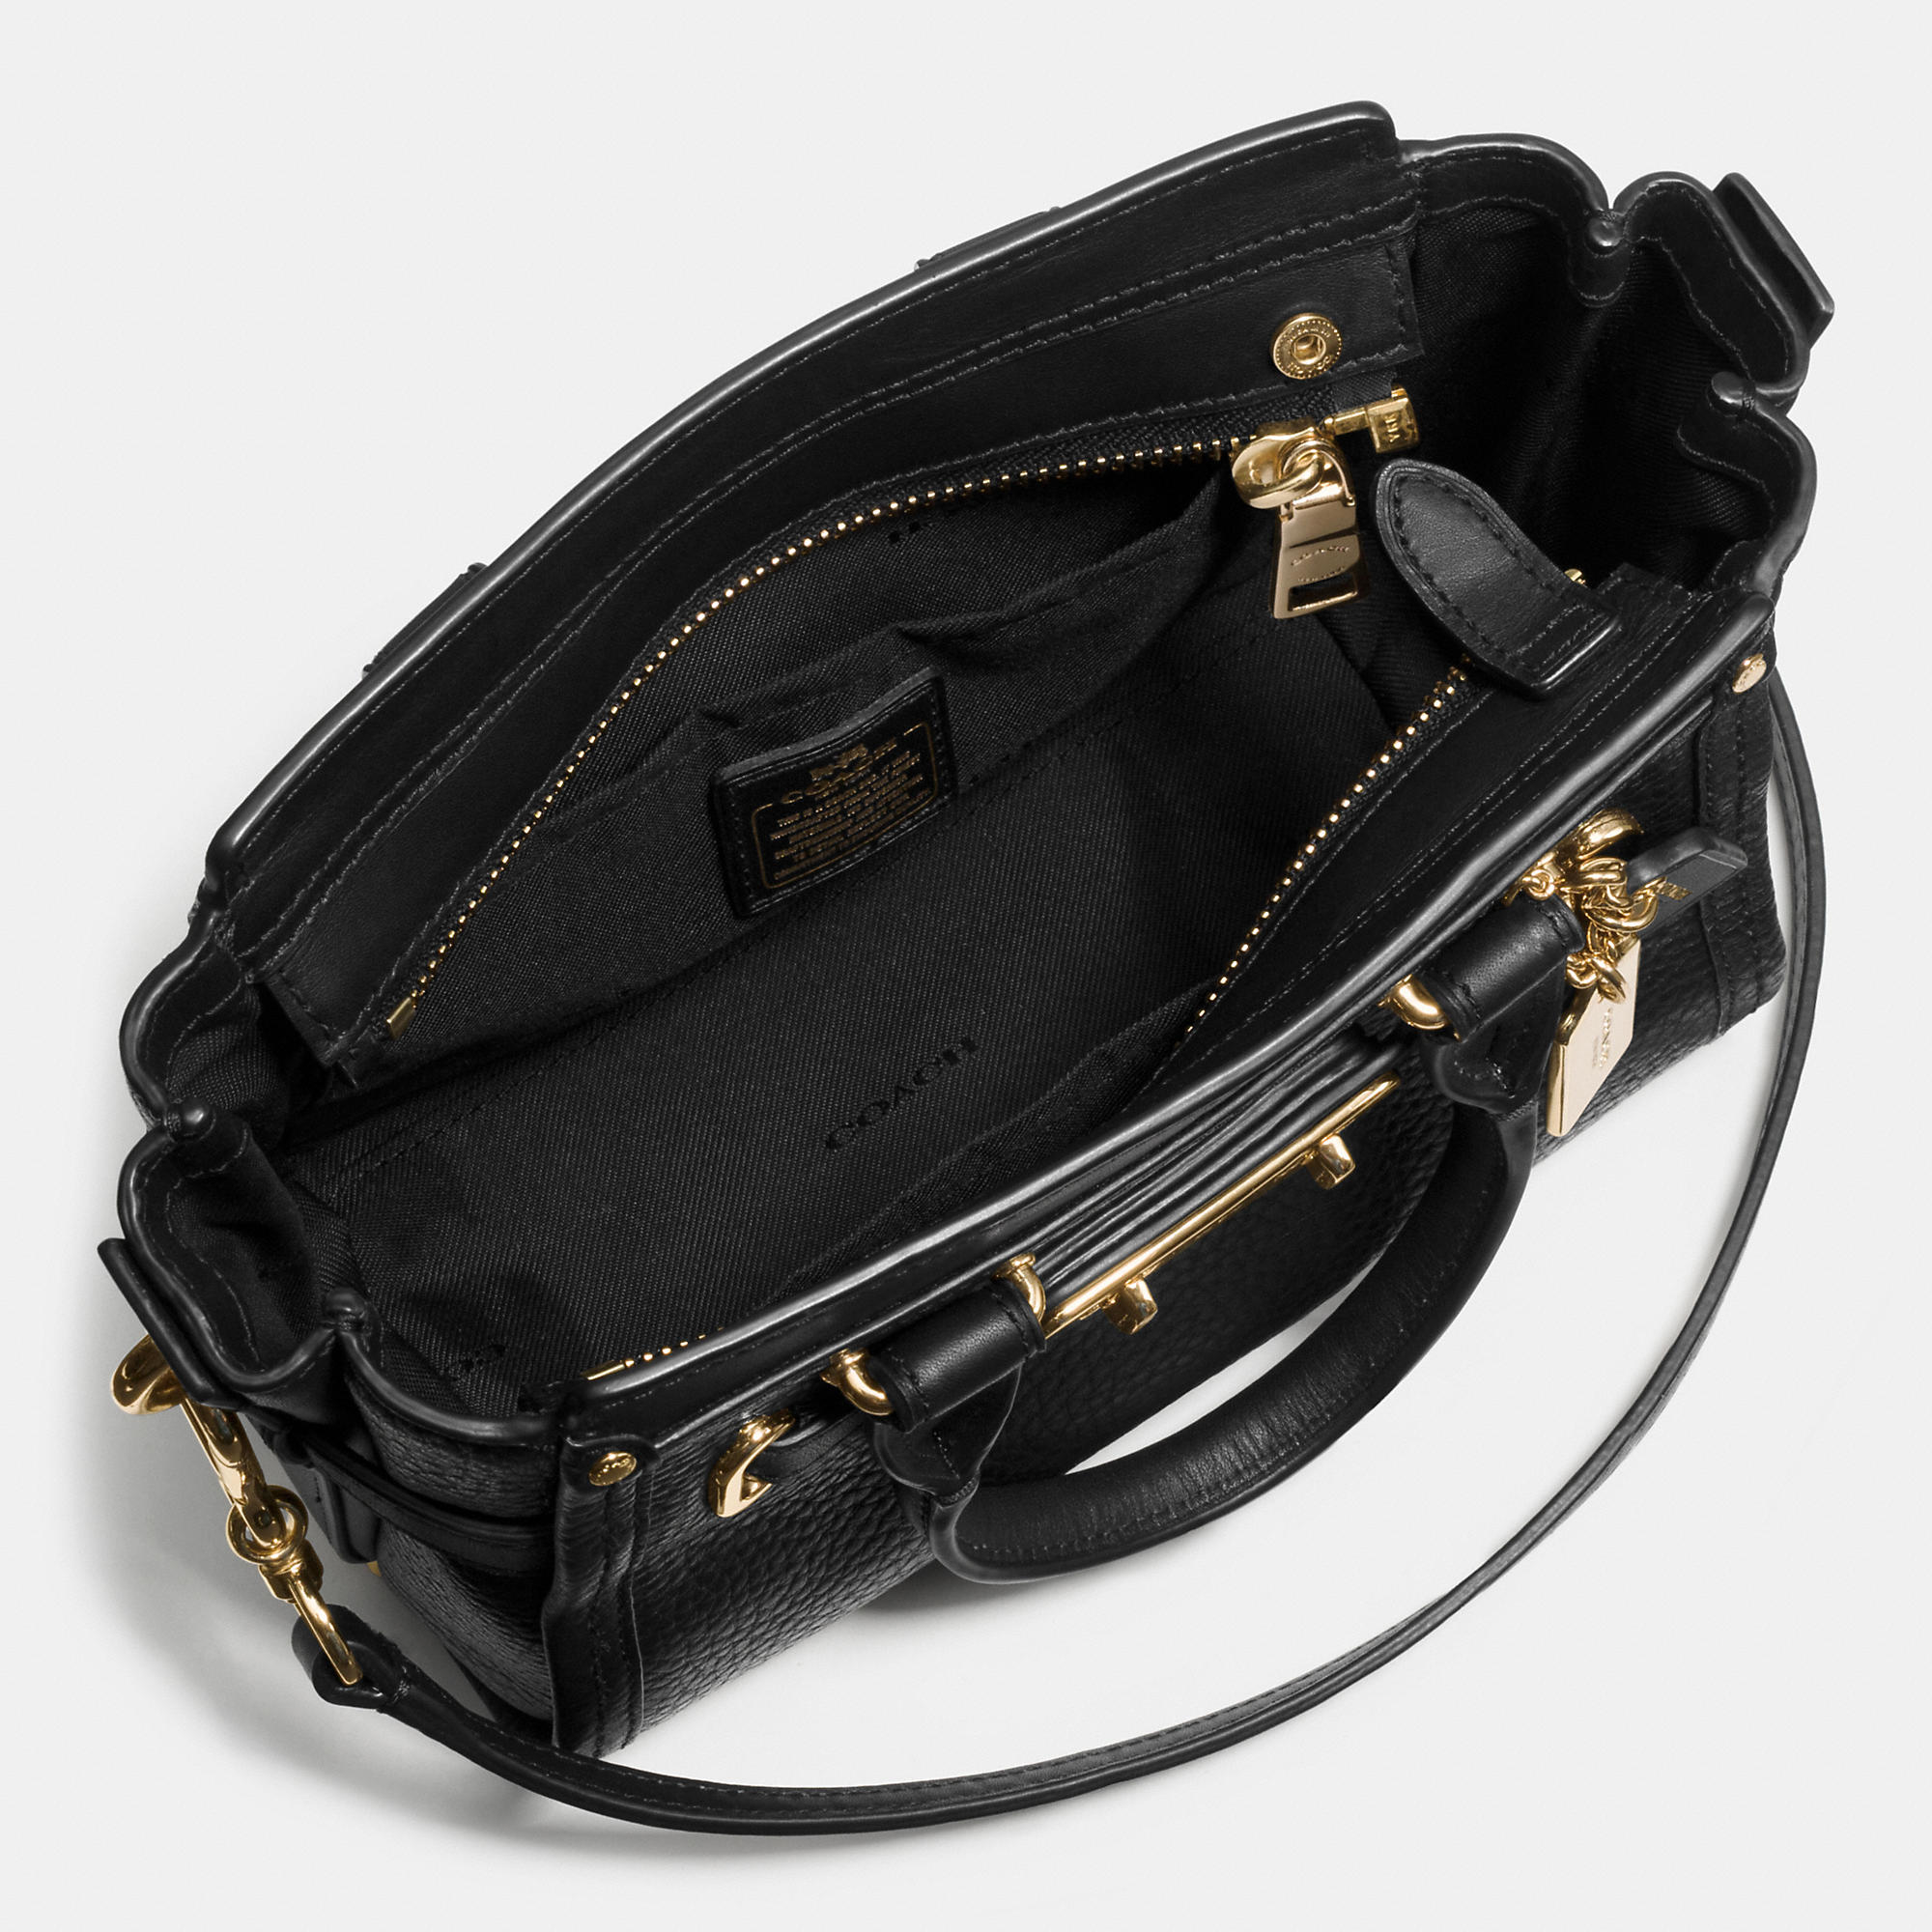 Lyst - Coach Swagger 20 Pebbled Leather Bag in Black